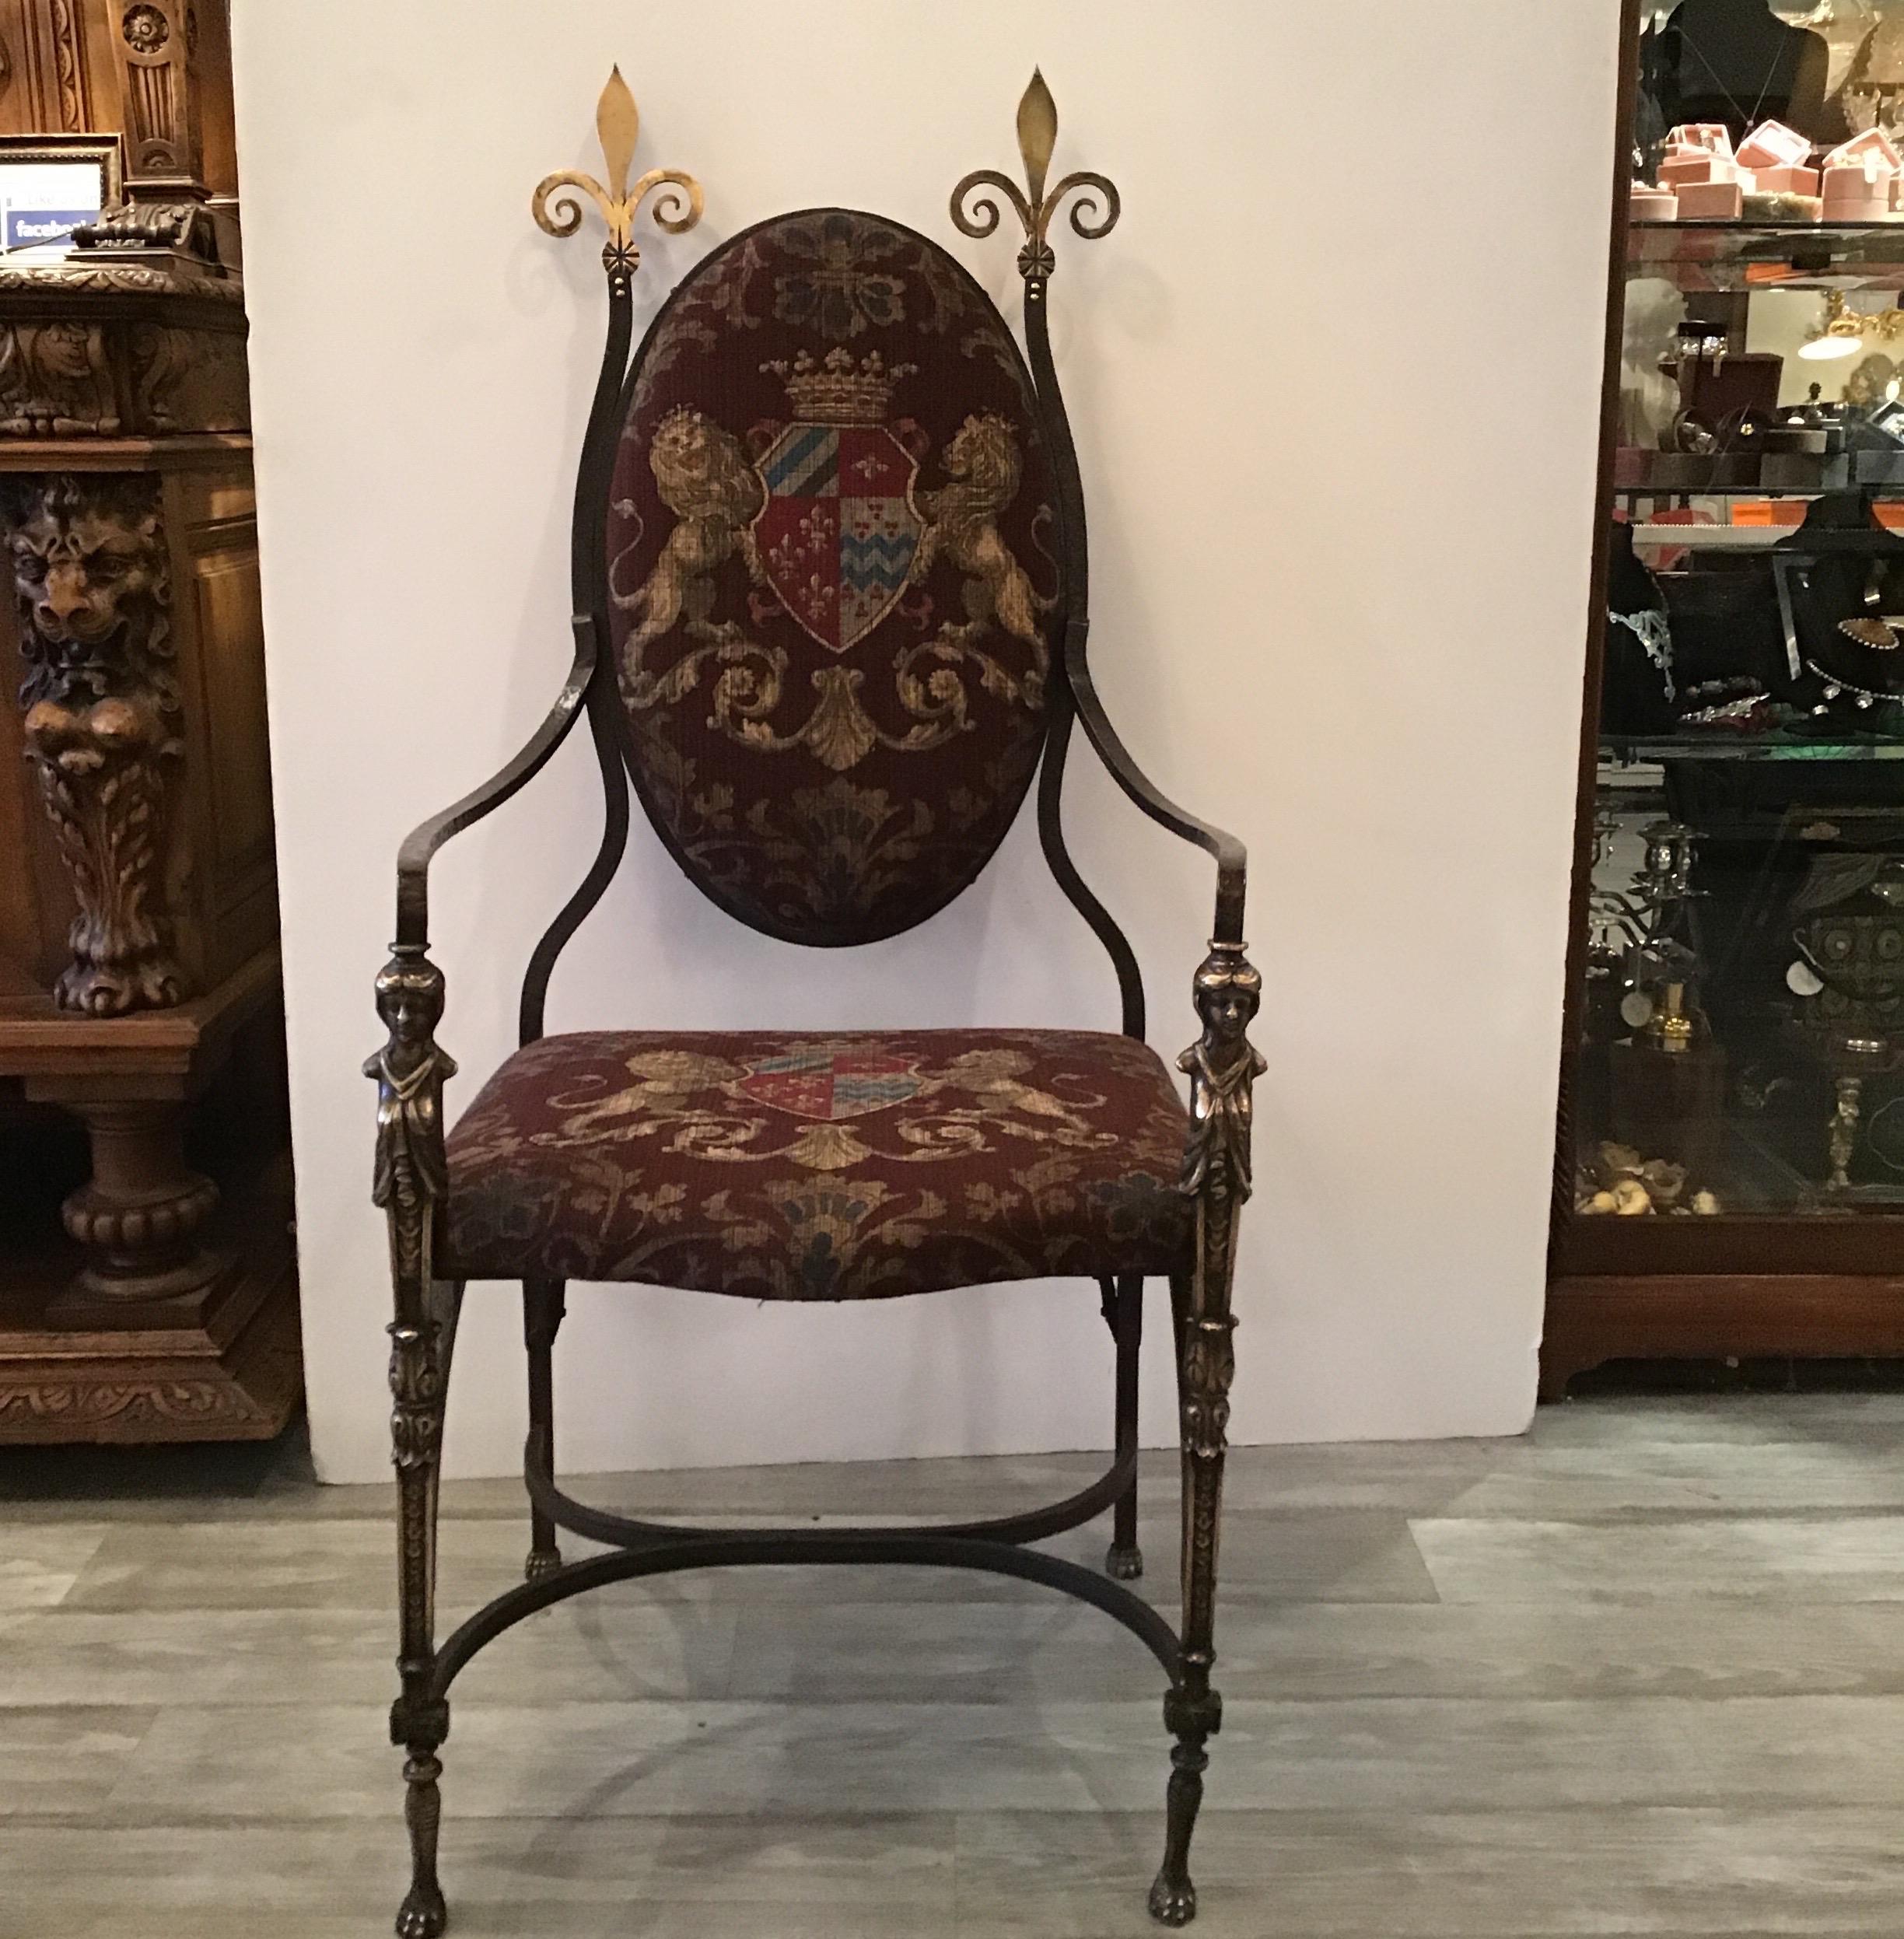 Handsome hand forged wrought iron and burnished brass chair with printed sturdy weight armorial fabric. The frame is solid hand forged iron with brass fleur-de-lis finials and cast brass figurative fronts and feet. The oval back and seat covered in